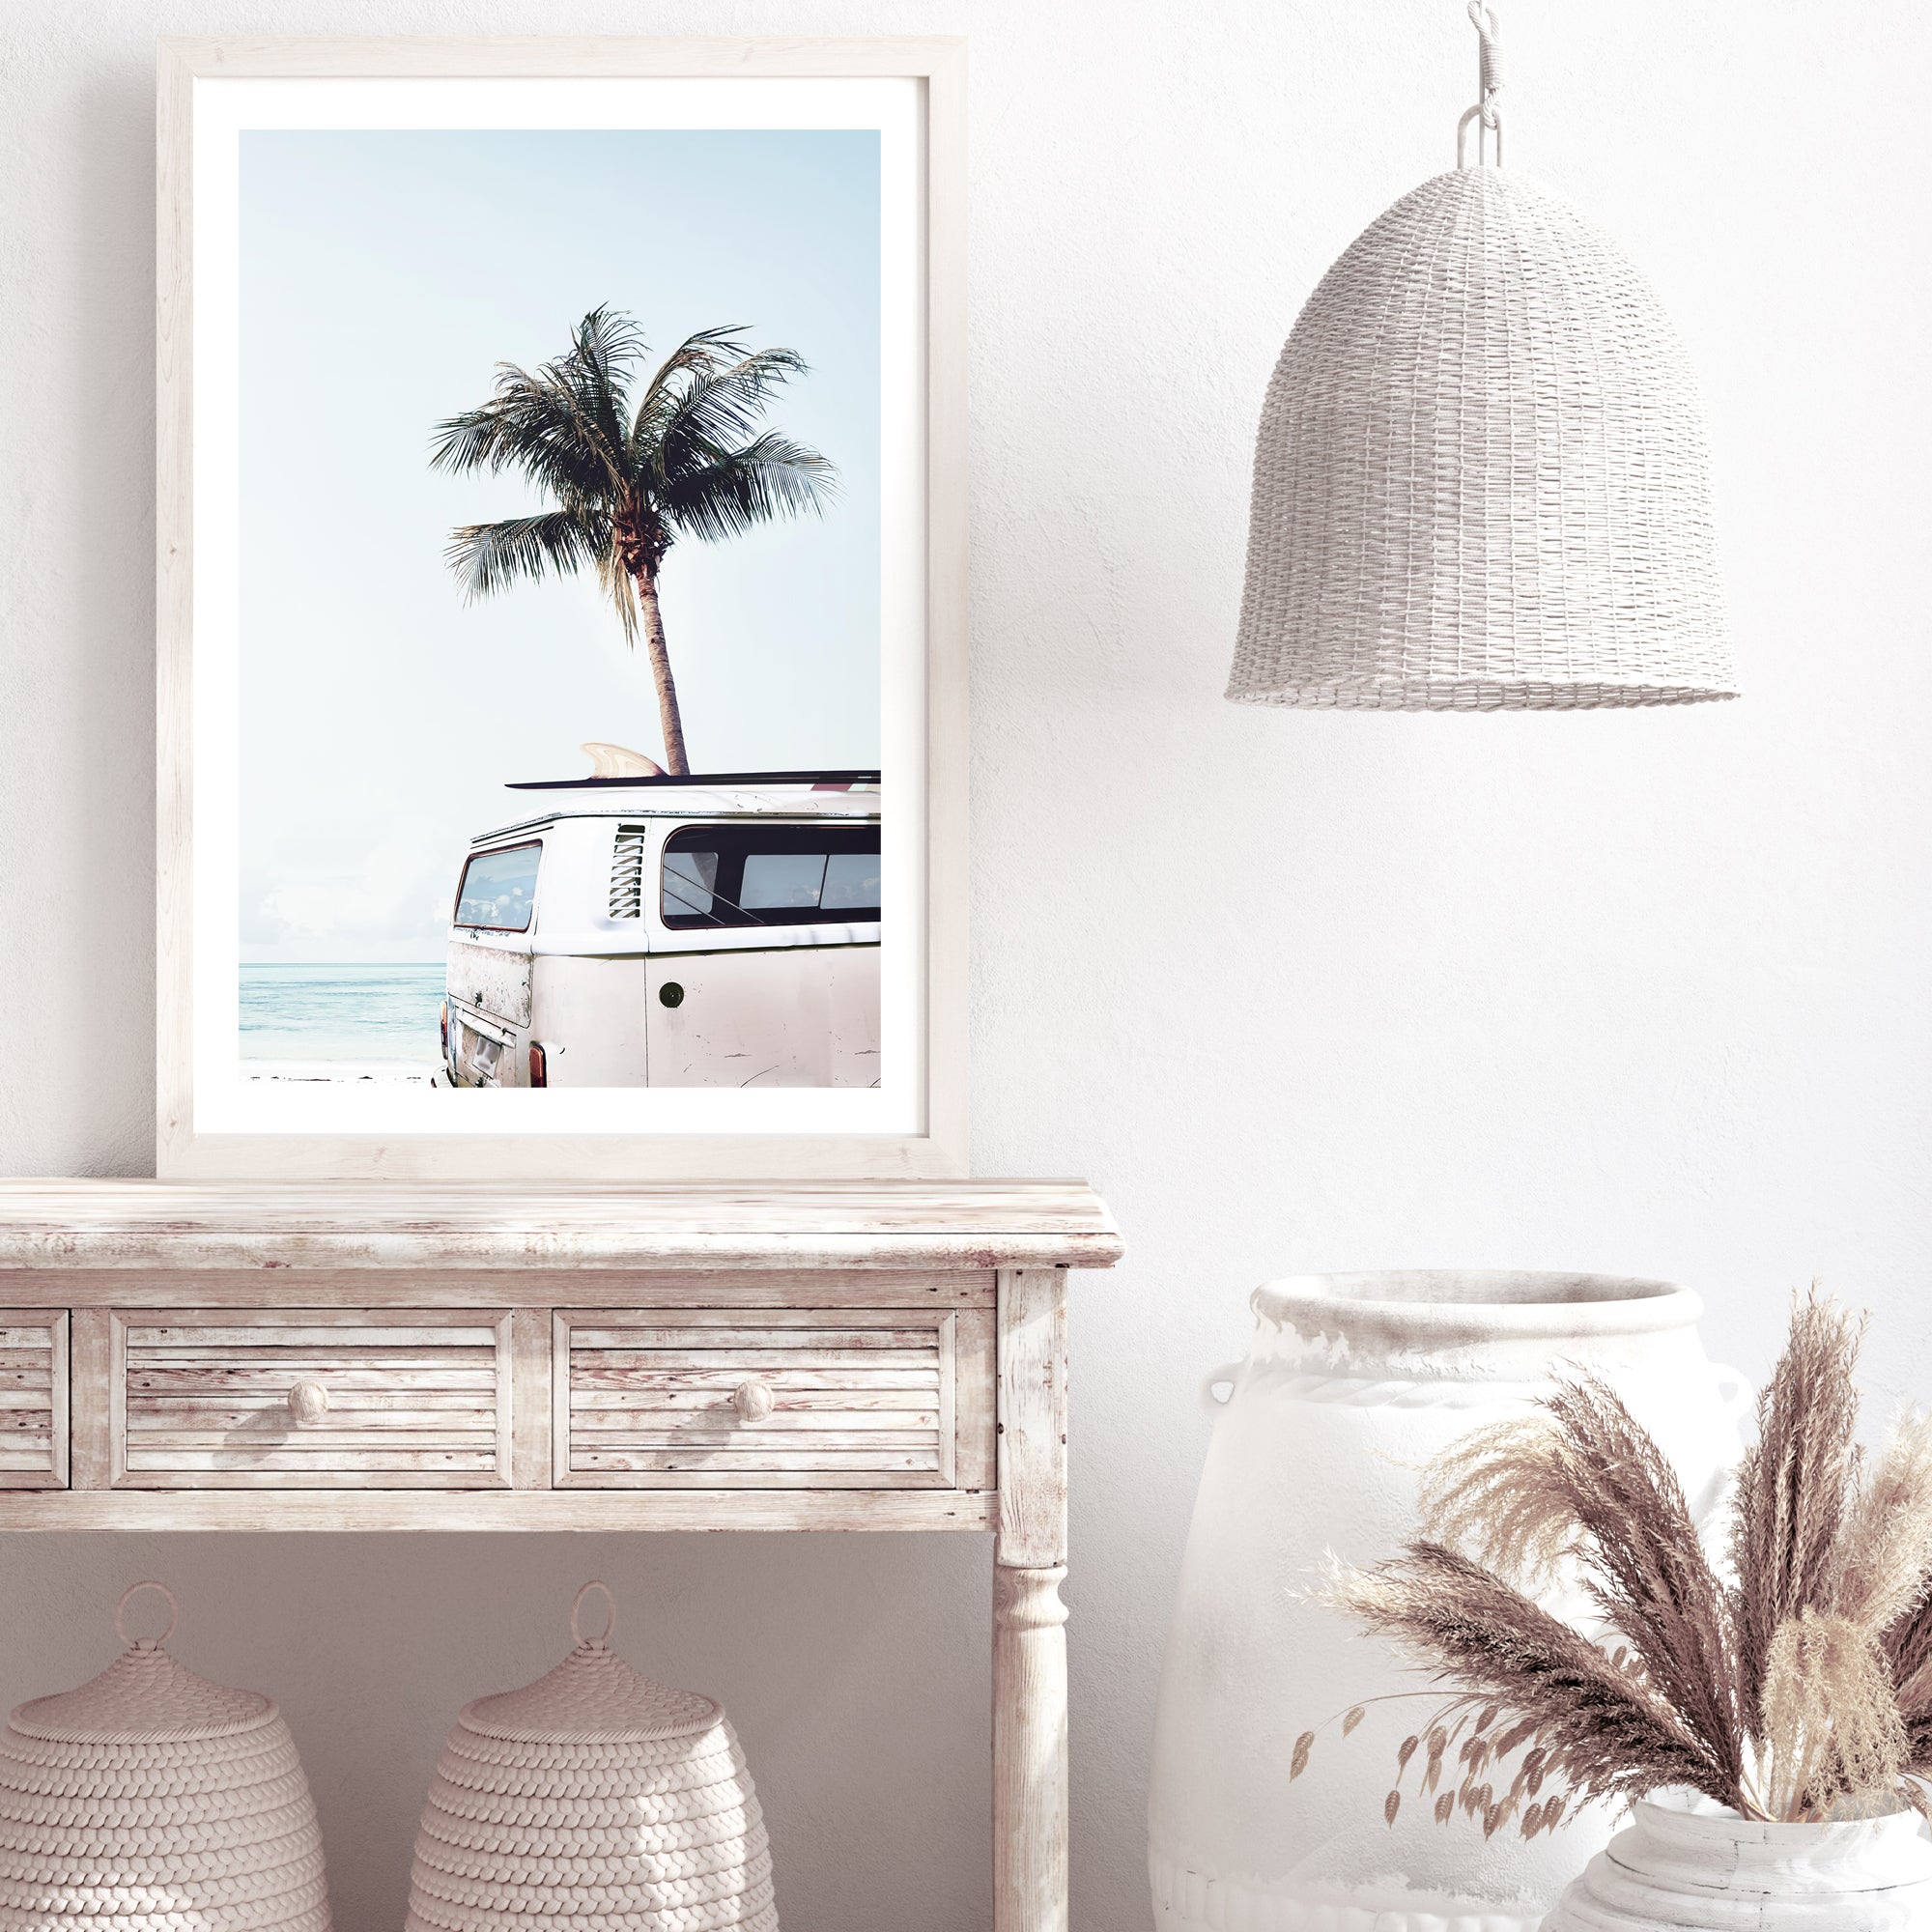 A wall art print featuring a blue Kombi van at the beach with a blue sky and palm trees, in canvas or photo print.